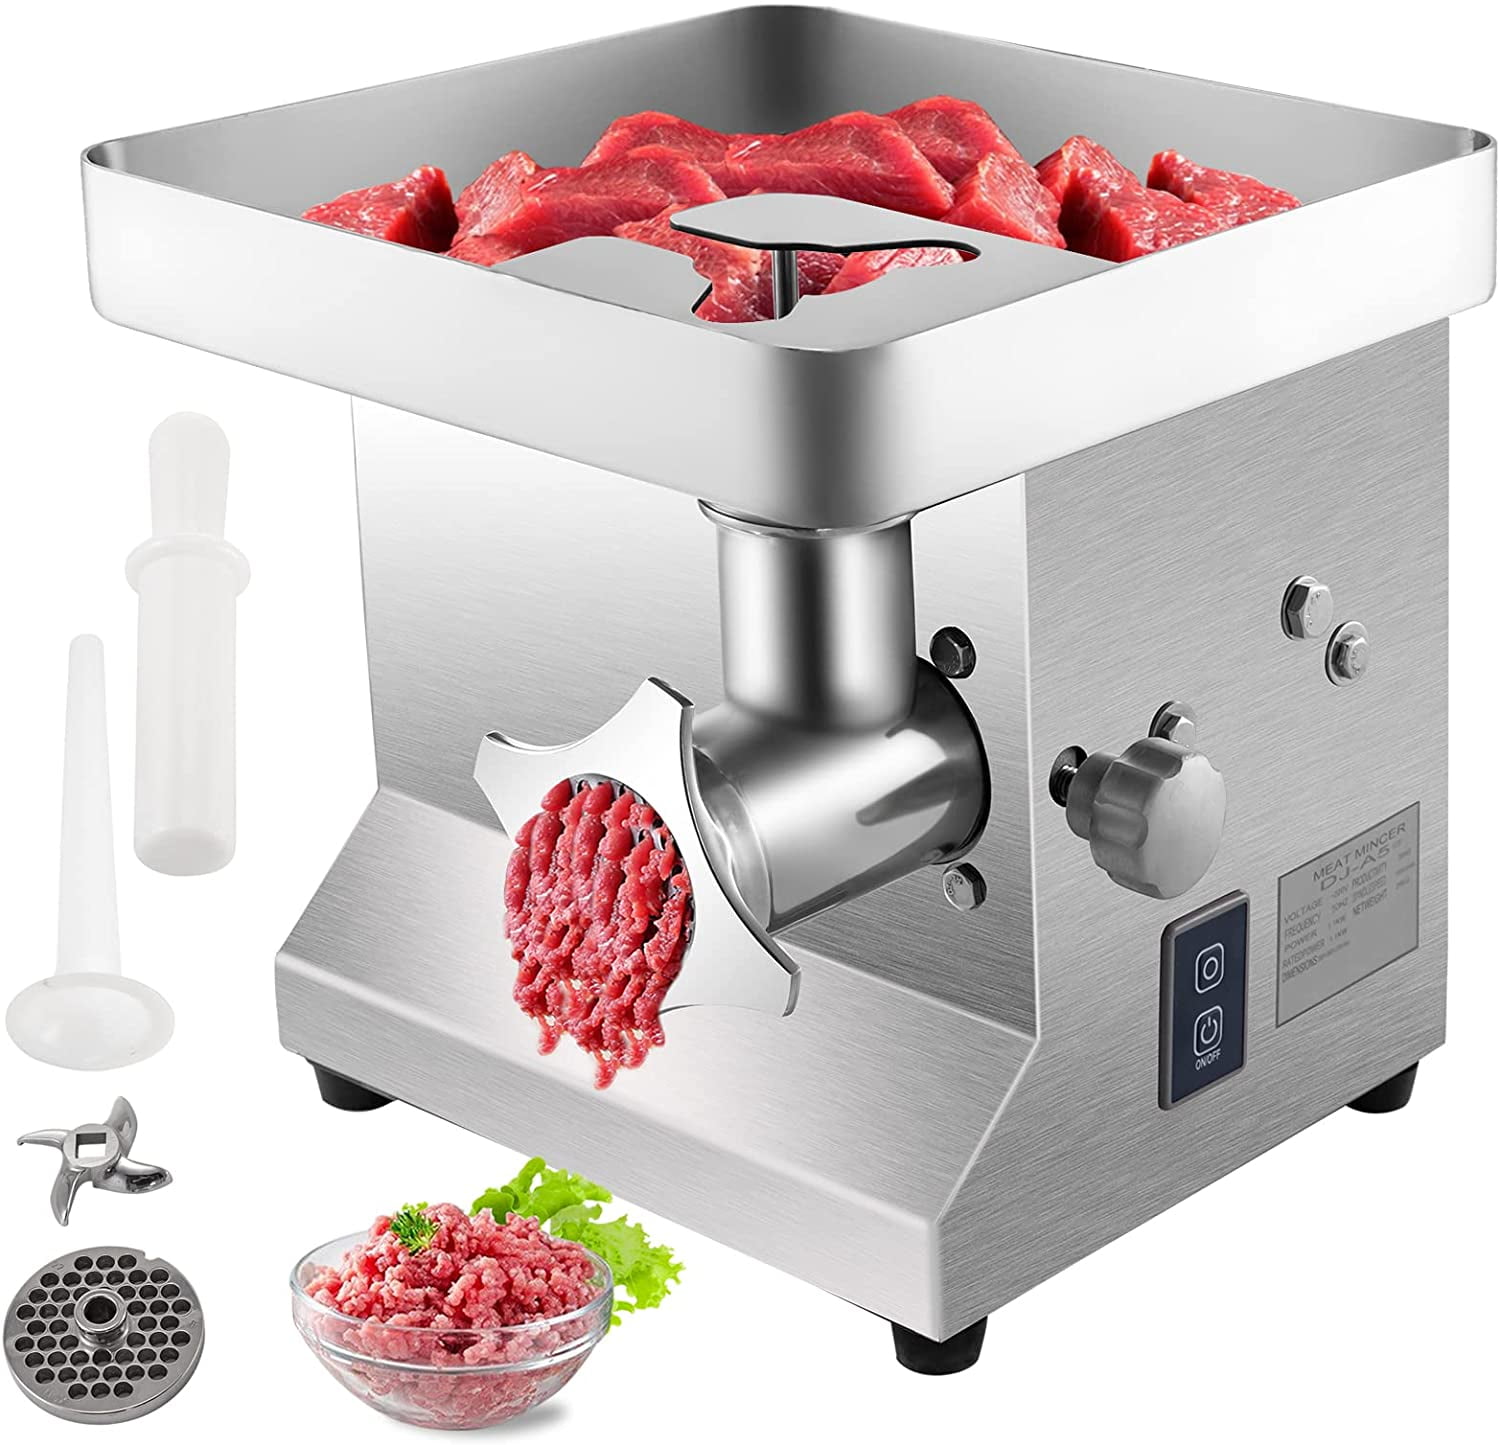 VEVORbrand Electric Meat Grinder 551lbs/hour 850W, Meat Grinder Machine  1.16 HP,Electric Meat Mincer with 2 Grinding Plates, Sausage Kit Set Meat  Grinder Heavy Duty Home Kitchen & Commercial Use Red 